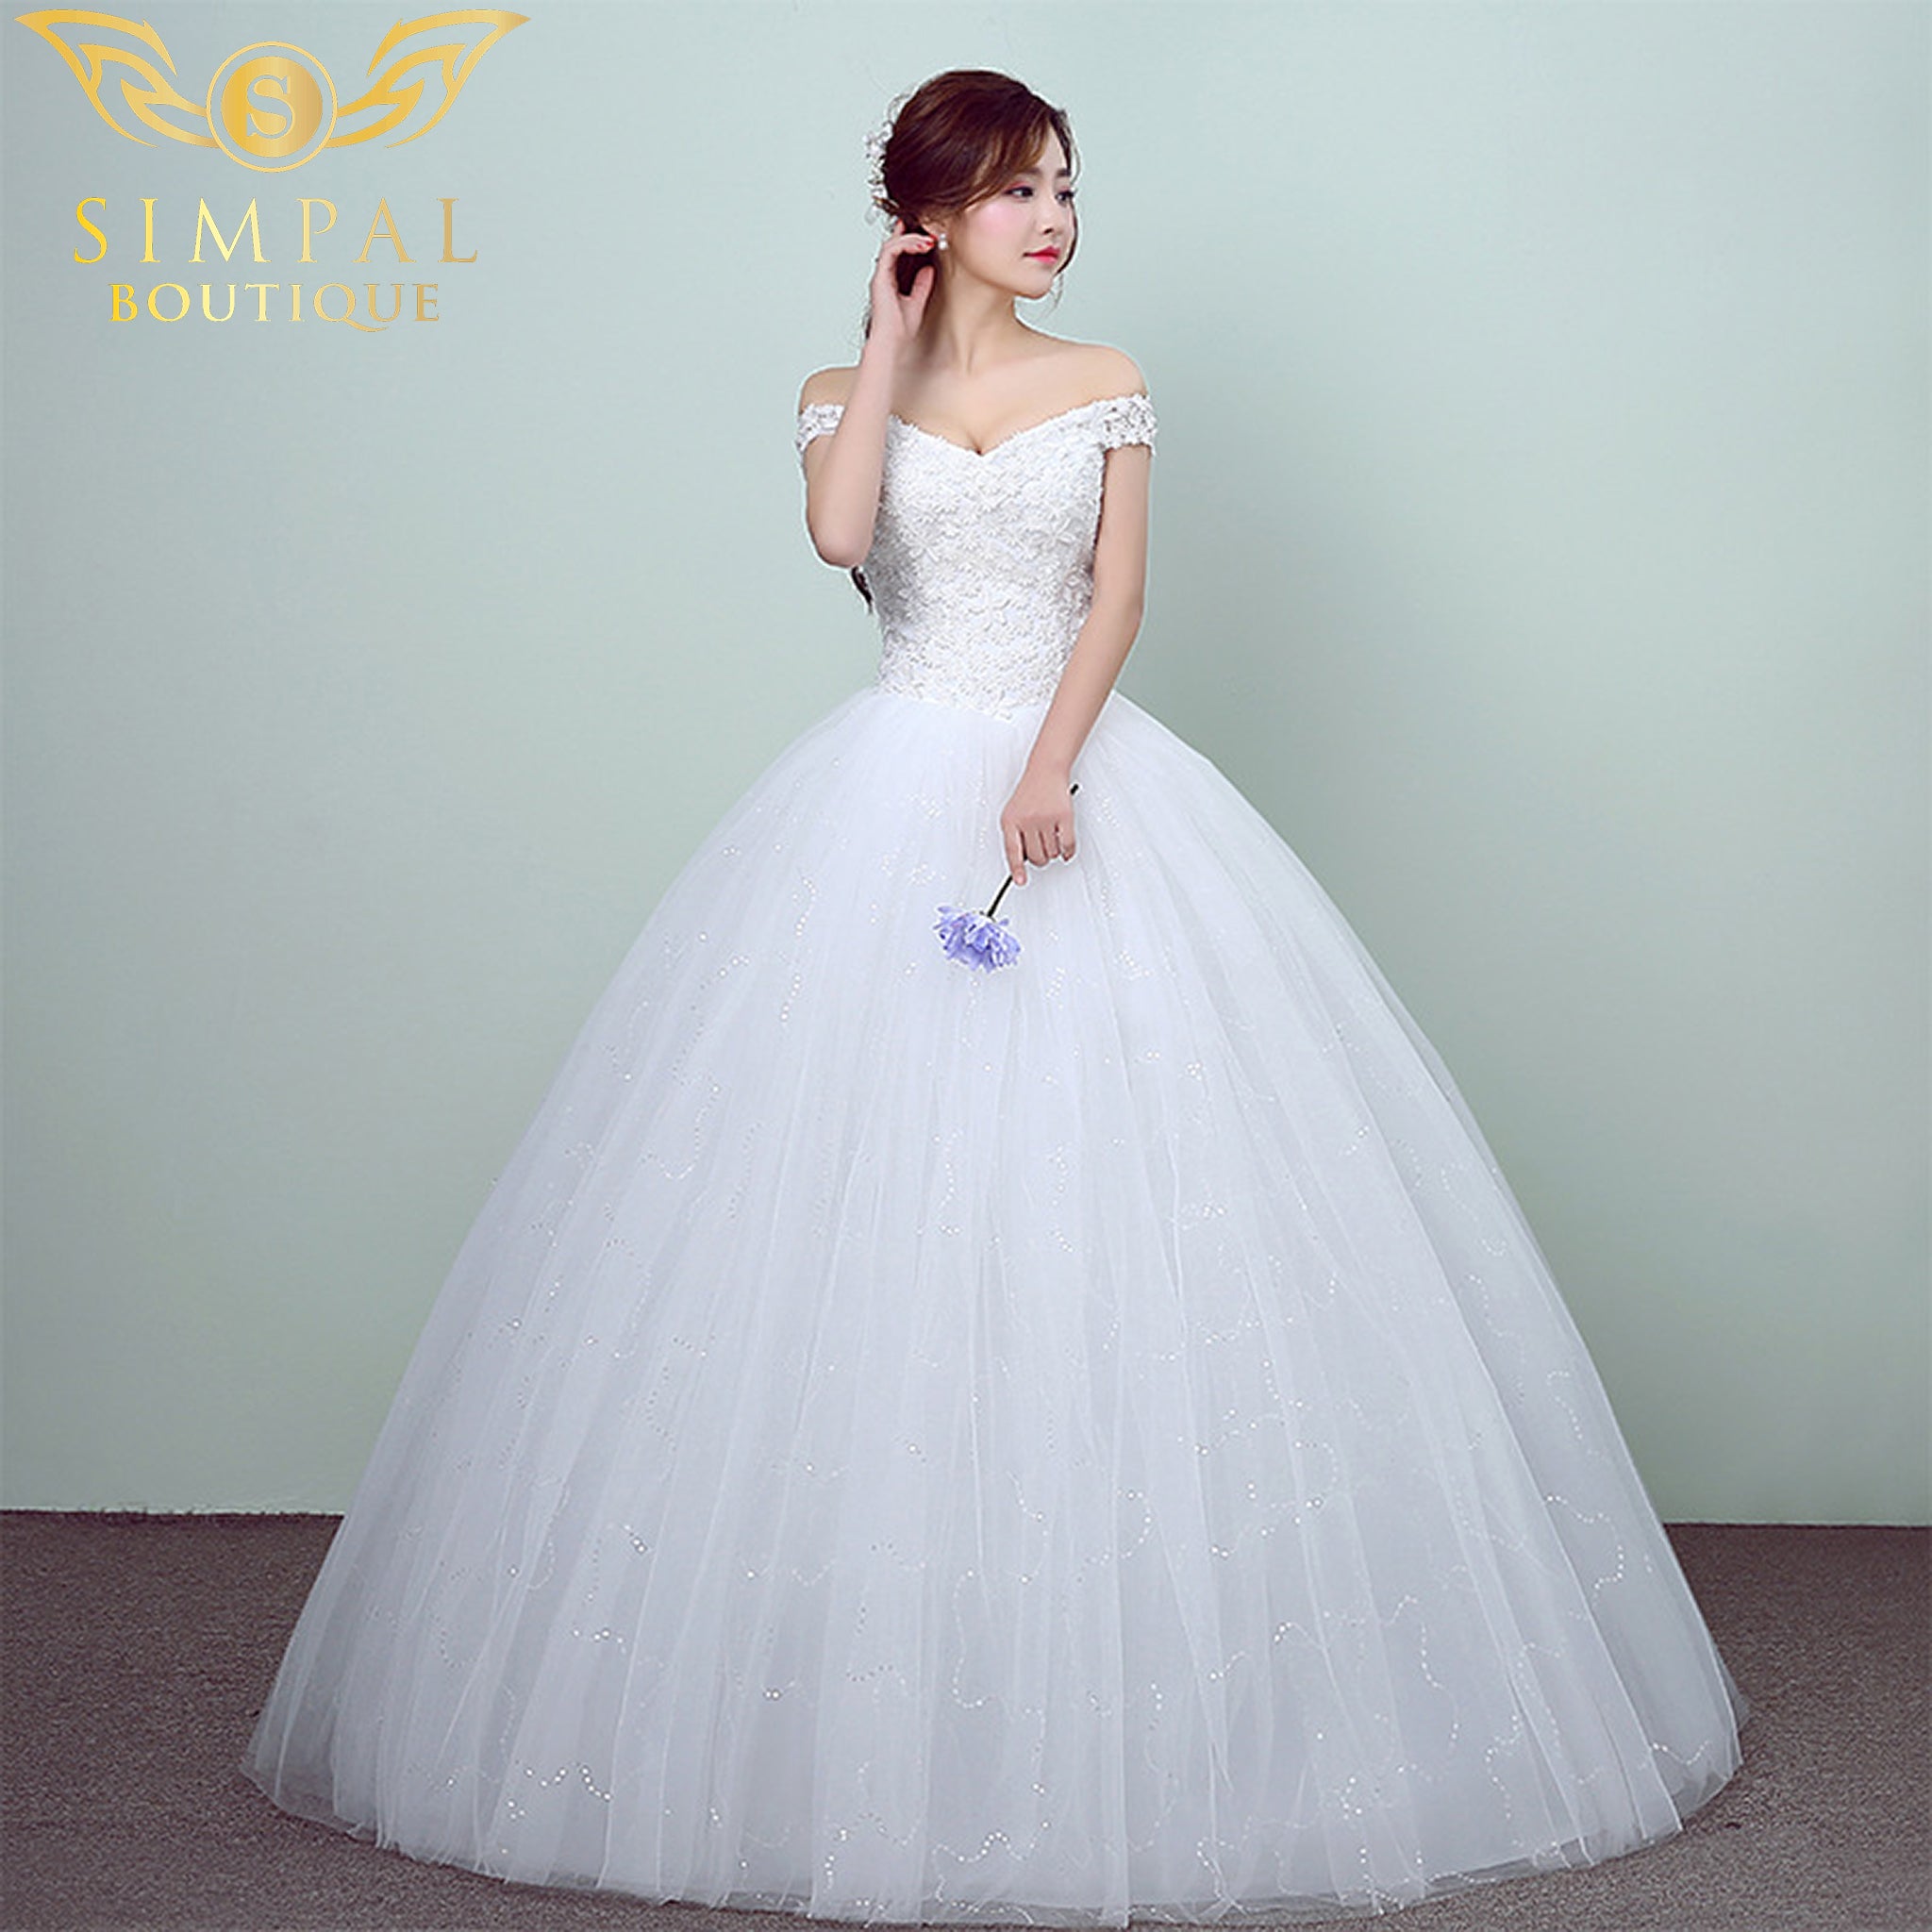 In Store New Slim and Simple wedding dress